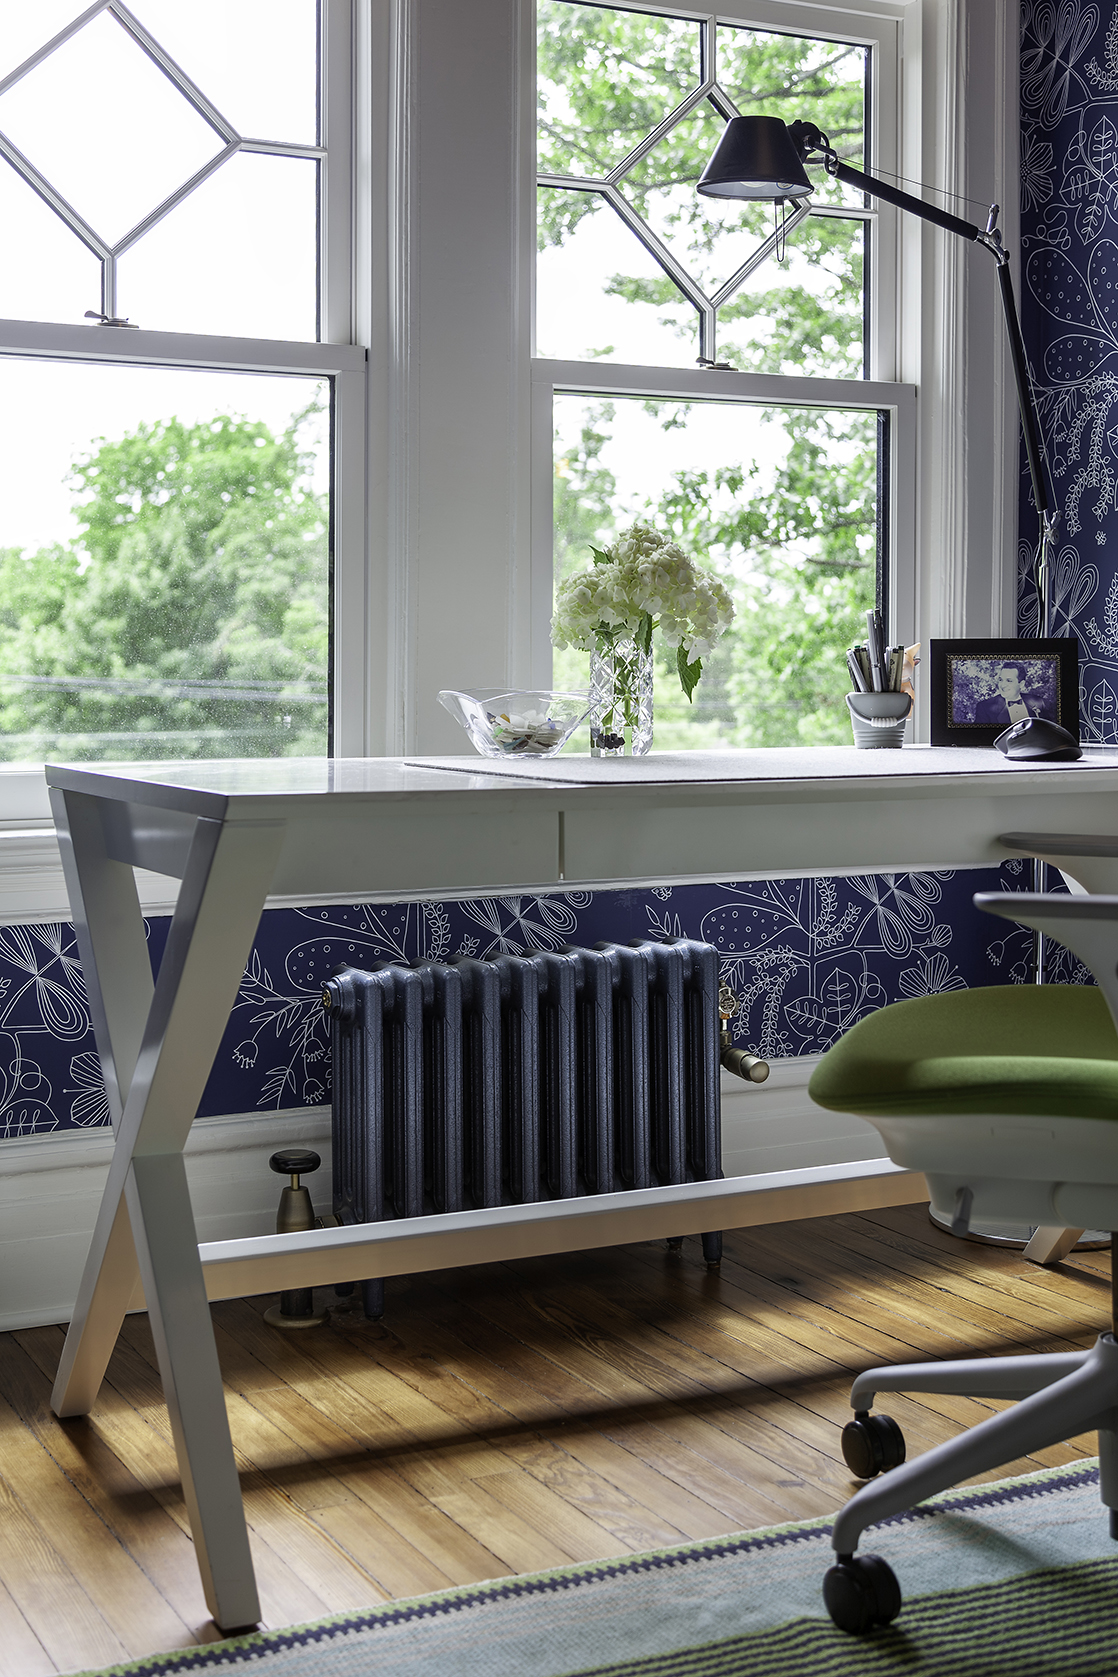 Blue steam cast iron radiator under window fitted with steam TRV (thermostatic radiator valve) in study with blue botanical wallpaper